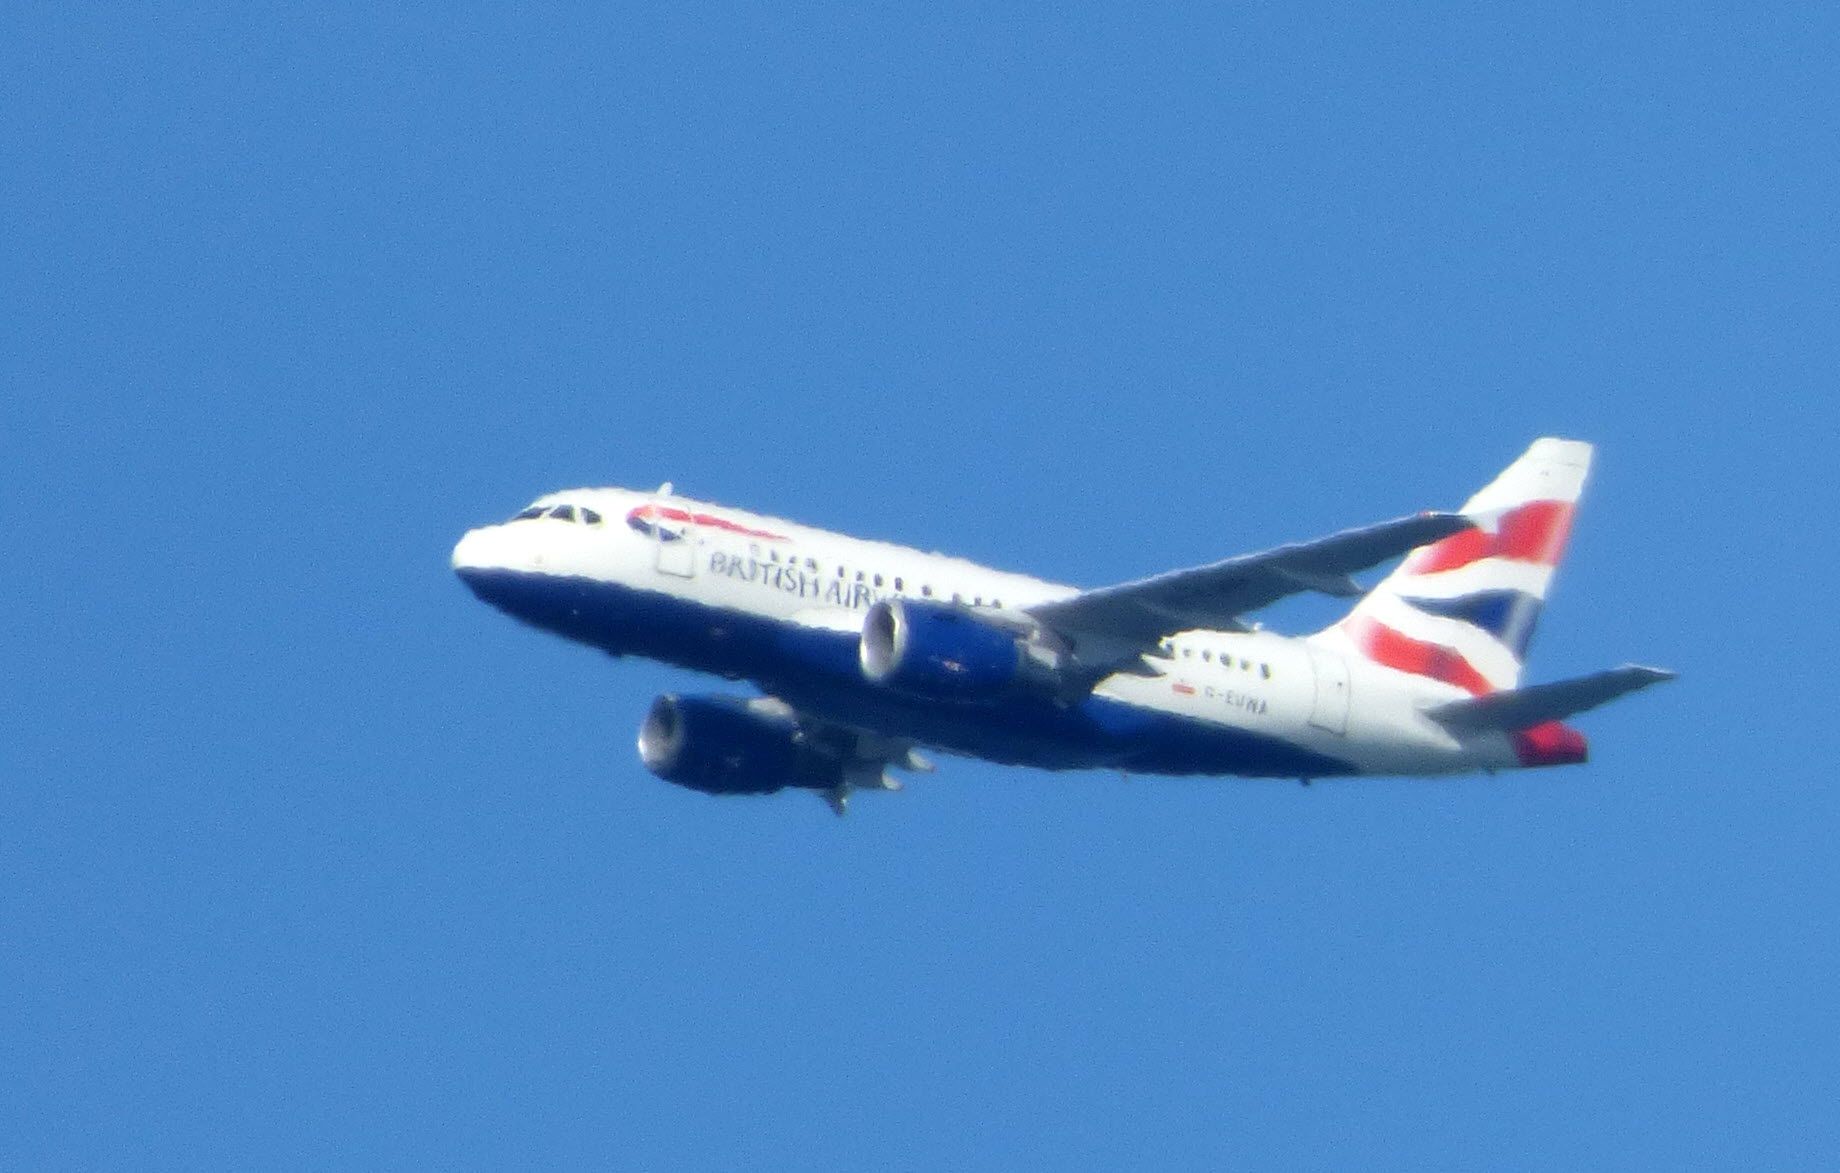 Airbus A318 (G-EUNA) - The smallest of the Airbus fleet this British Airways Airbus A318 is shown minutes away from crossing the North Atlantic with an arrival shortly into JFK in the Spring of 2017. Tough shooting with the air and water vapor and max zoom rendering this a bit blurry.